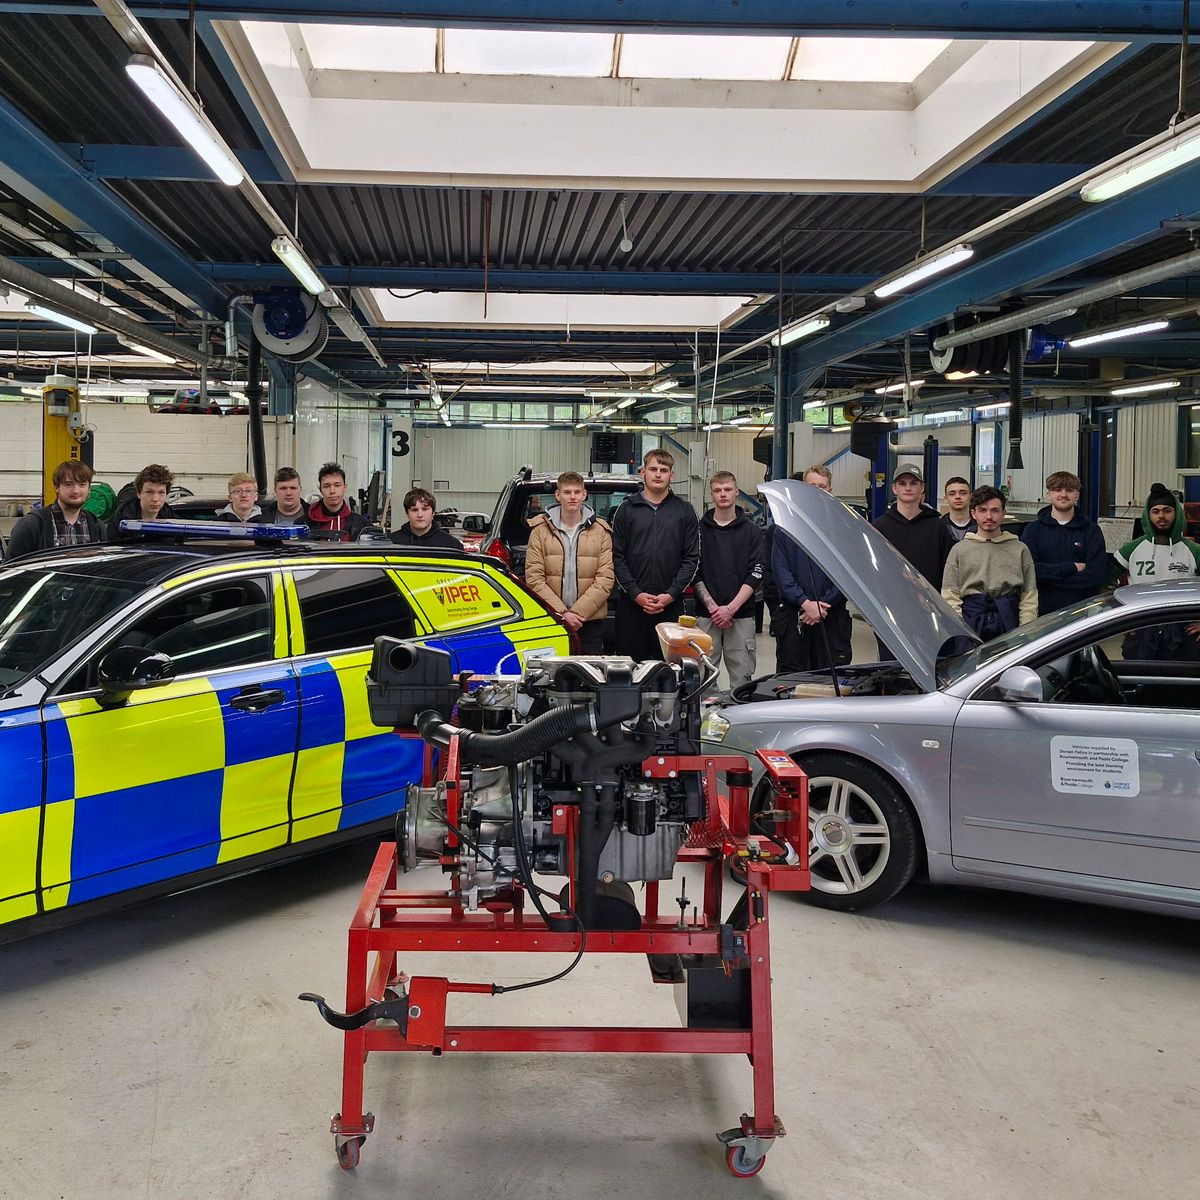 Ten seized cars donated by Dorset Police to Bournemouth and Poole College in new initiative news.bournemouthone.com/74121/ via @bournemouthone